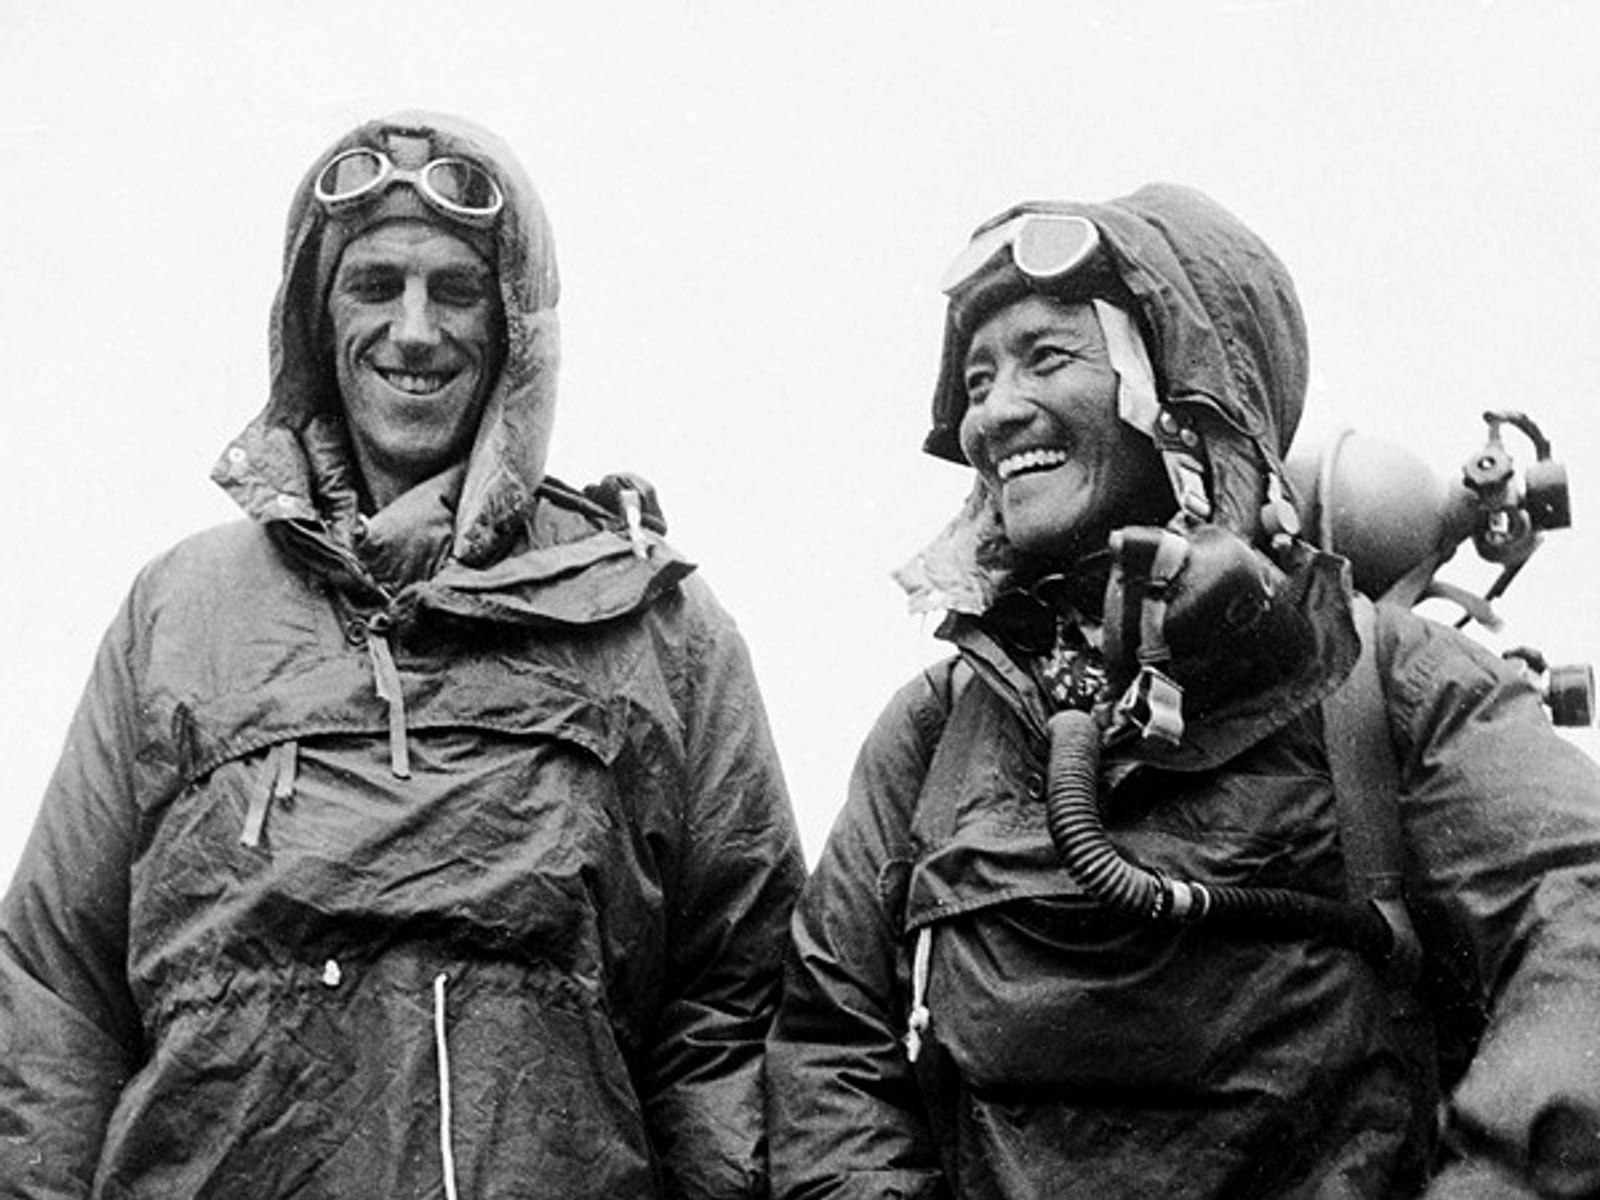 Edmund Hillary and Tenzing Norgay reached the summit of Everest, 8,848 meters